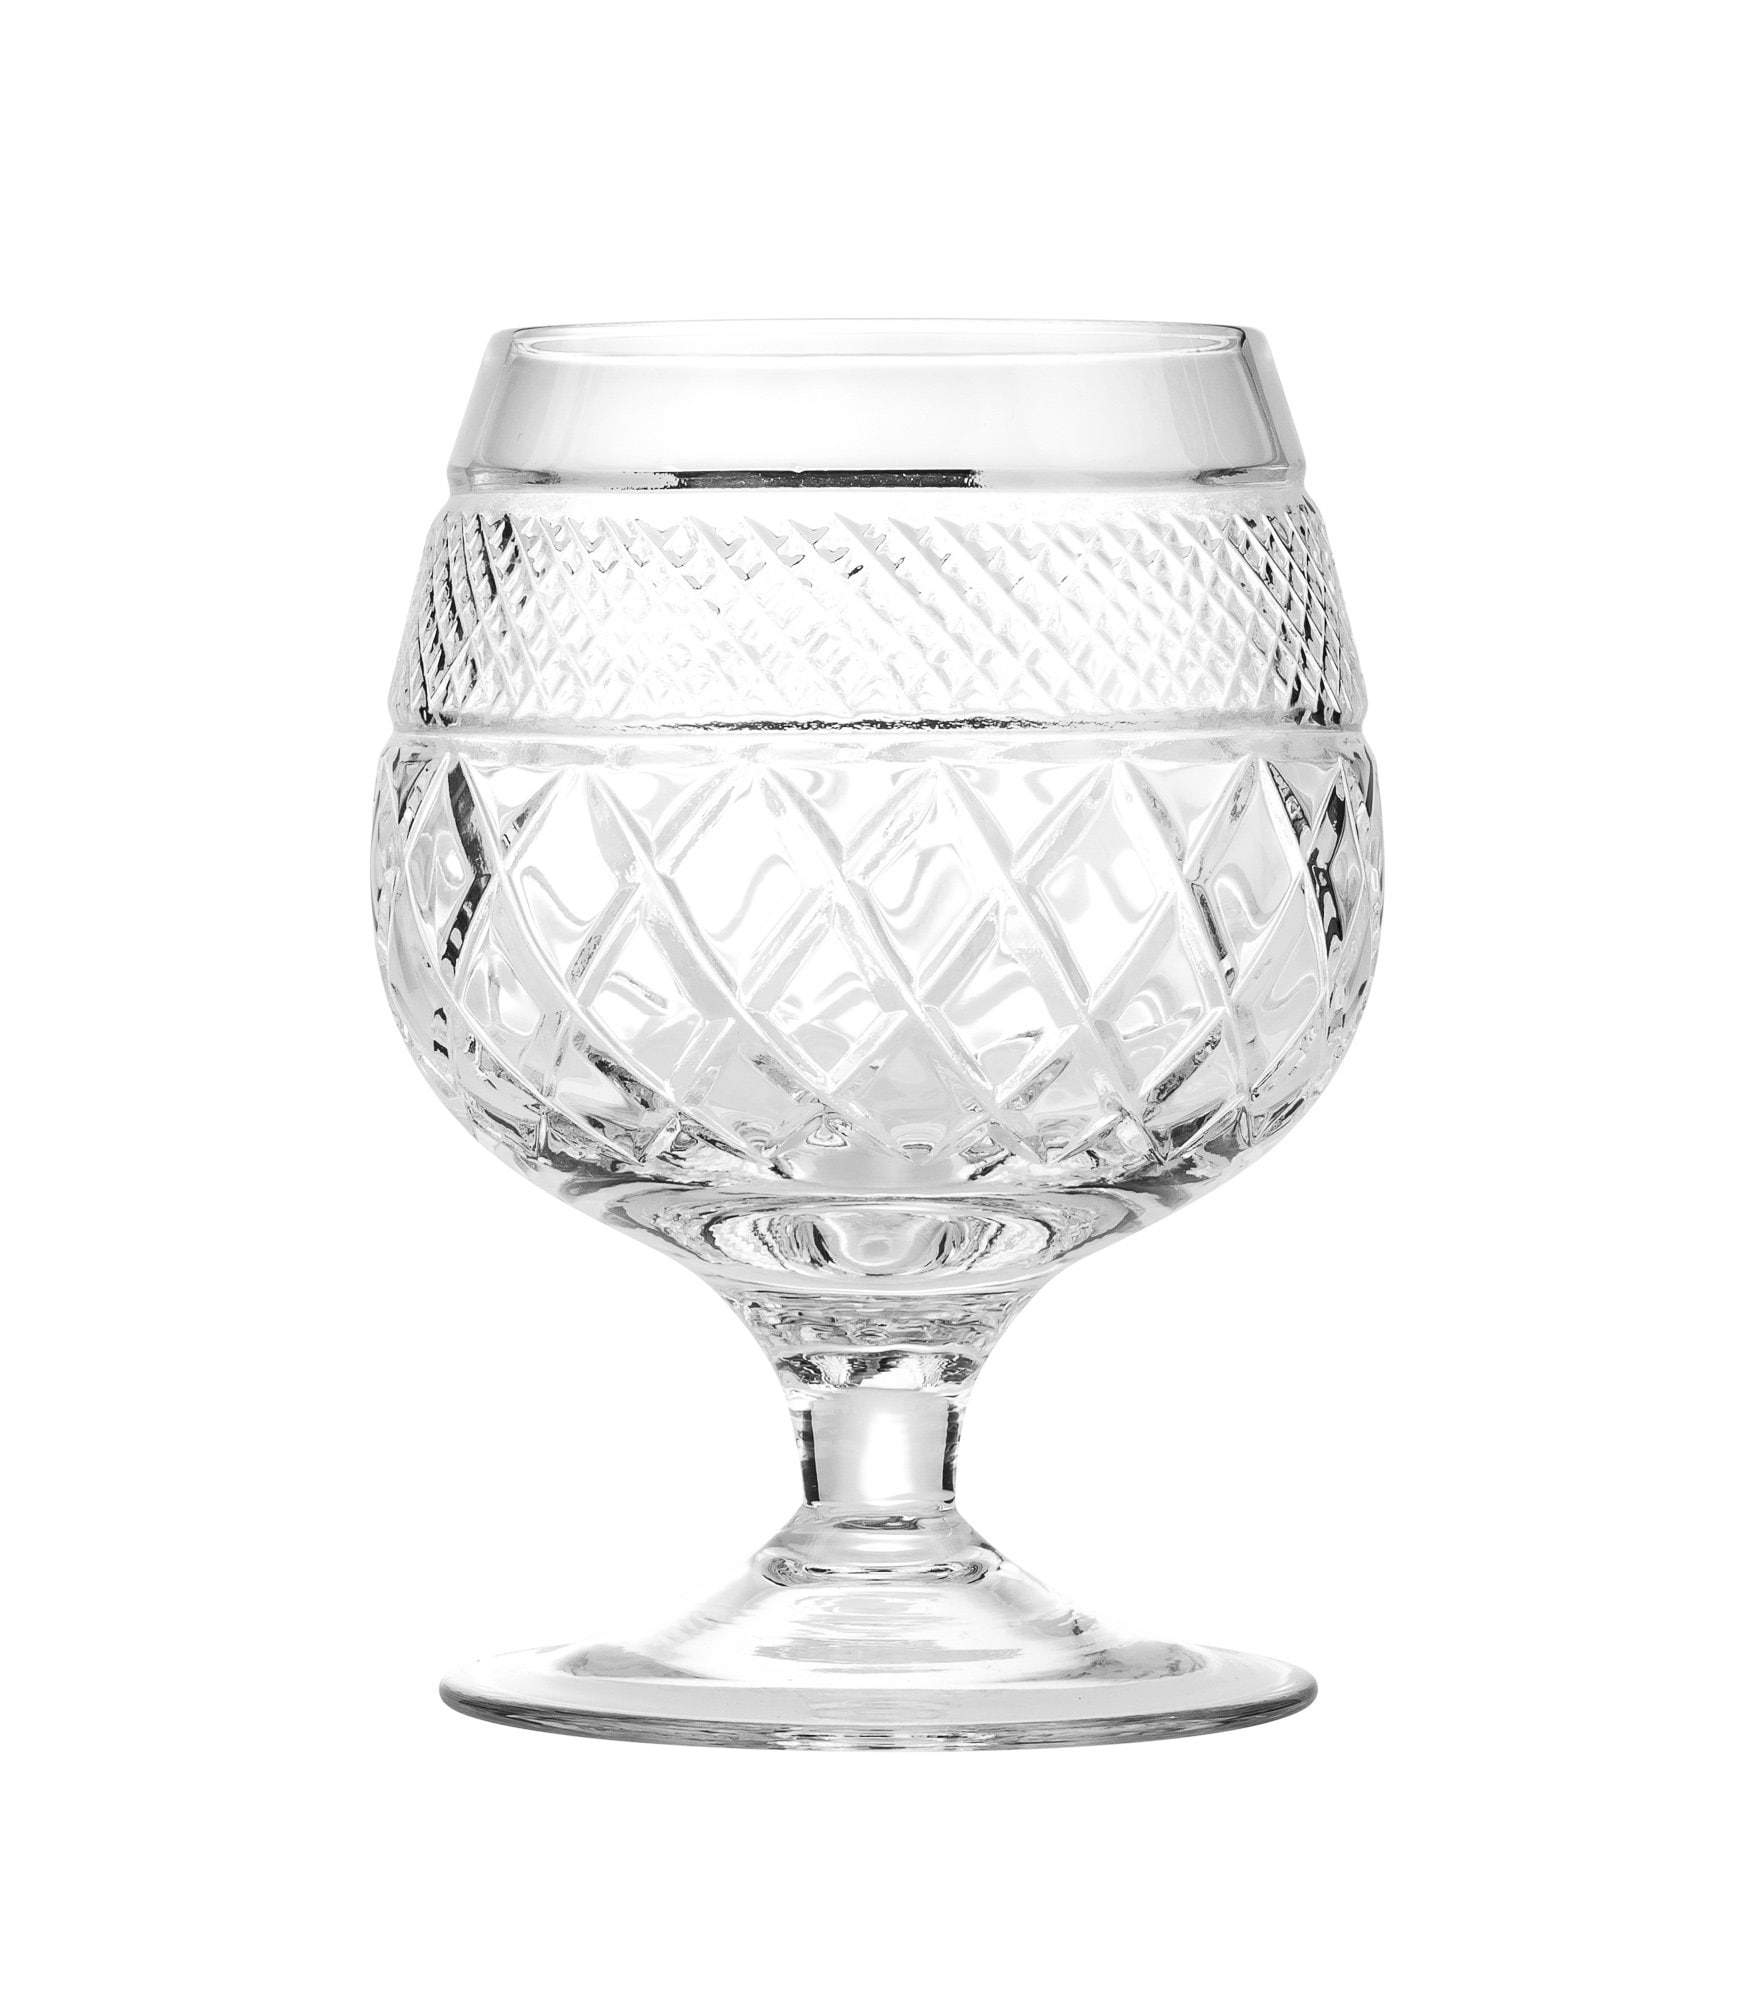 Bohemia Crystal 40792/300/382840 10 oz Crystal Wine Glasses, Red Old-Fashioned Glasses on A Long Stem, Set of 6